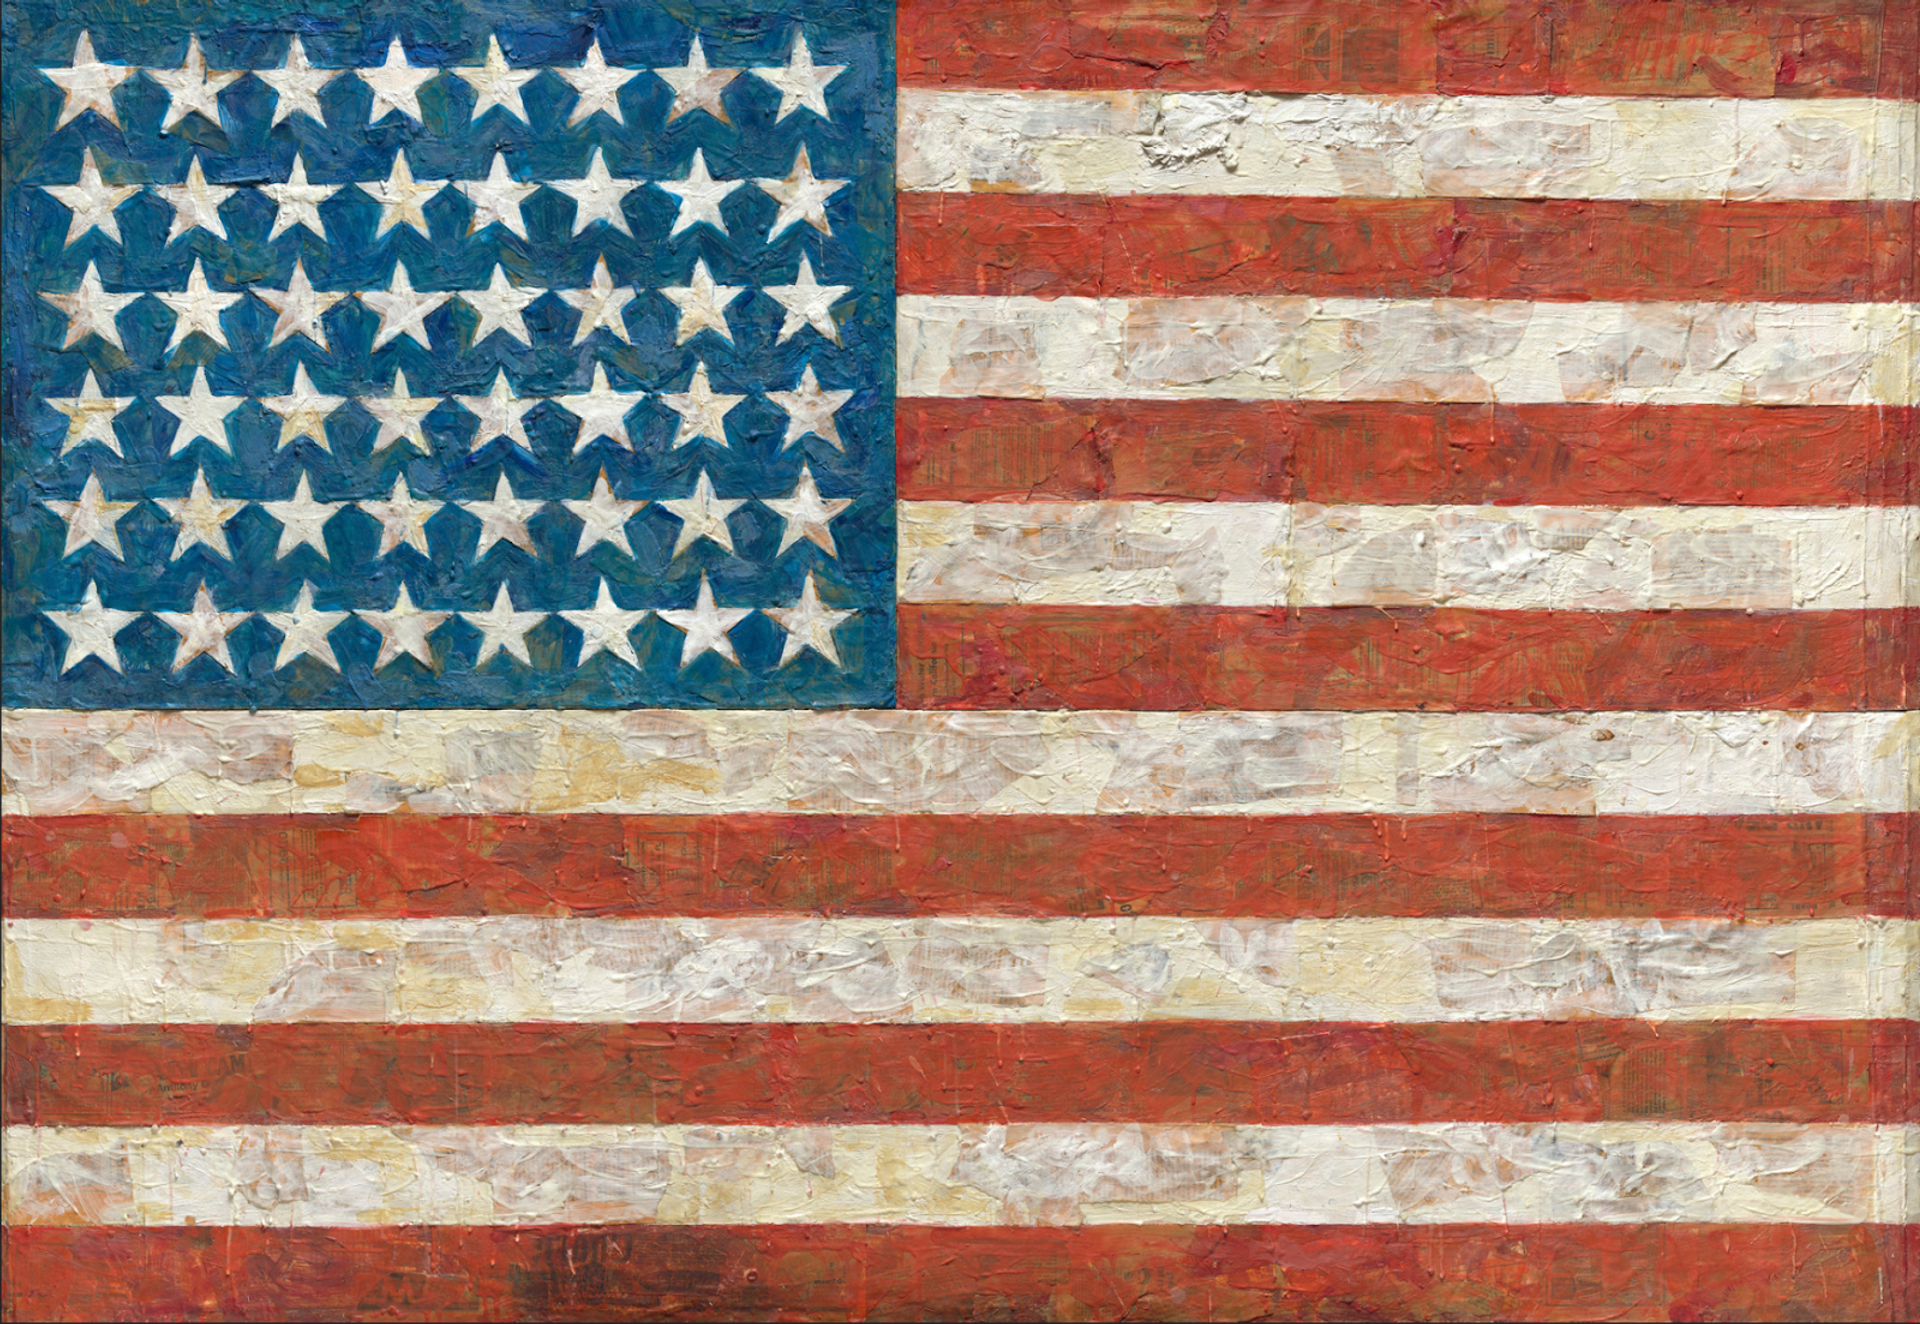  The American flag, red and white stripes with white stars on a blue rectangle in the left corner, painted using encaustic.